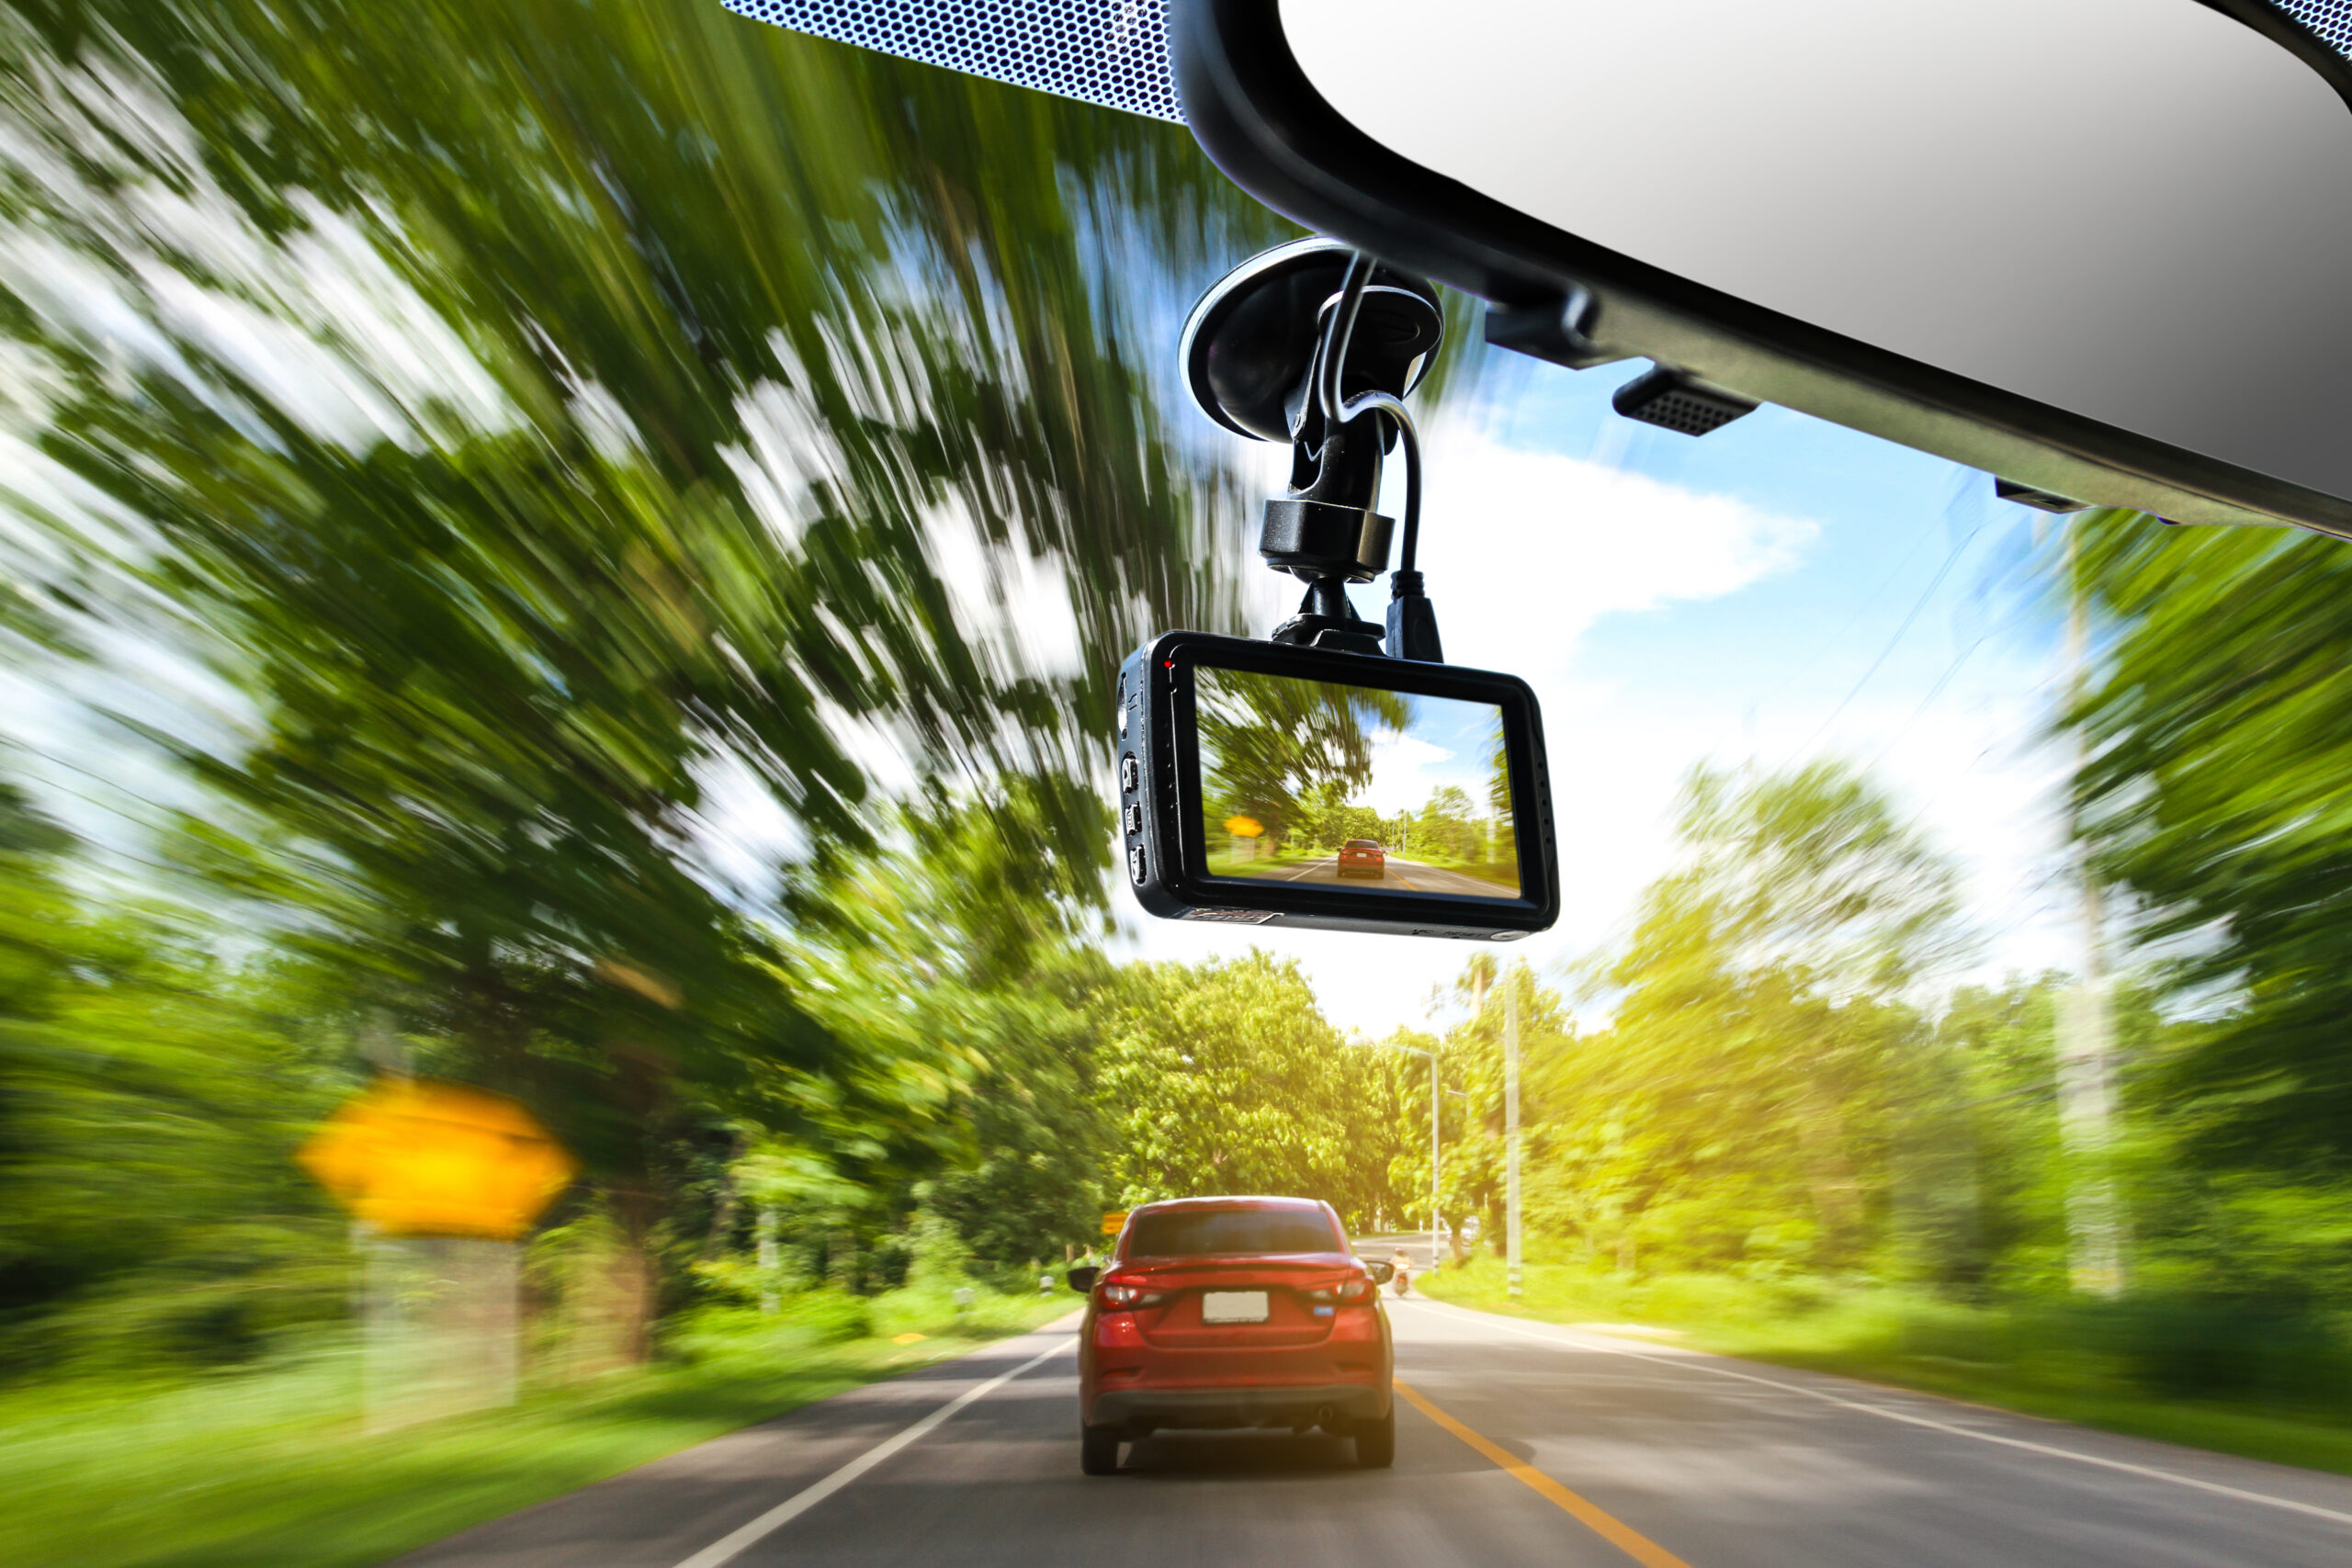 Cctv,Car,Camera,For,Safety,On,The,Road,Accident